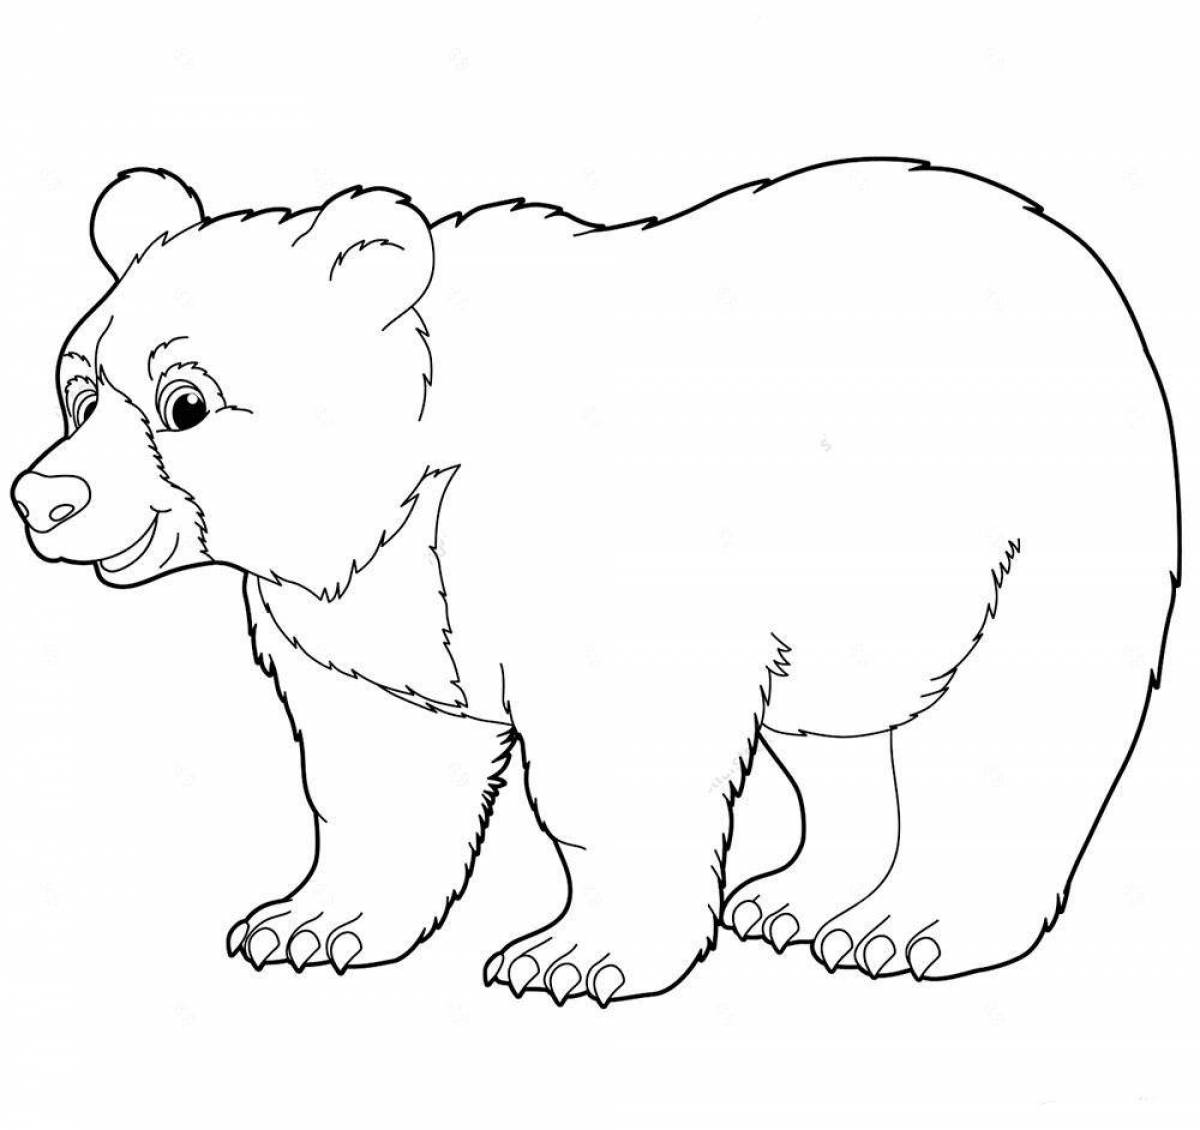 Fun bear coloring book for 2-3 year olds